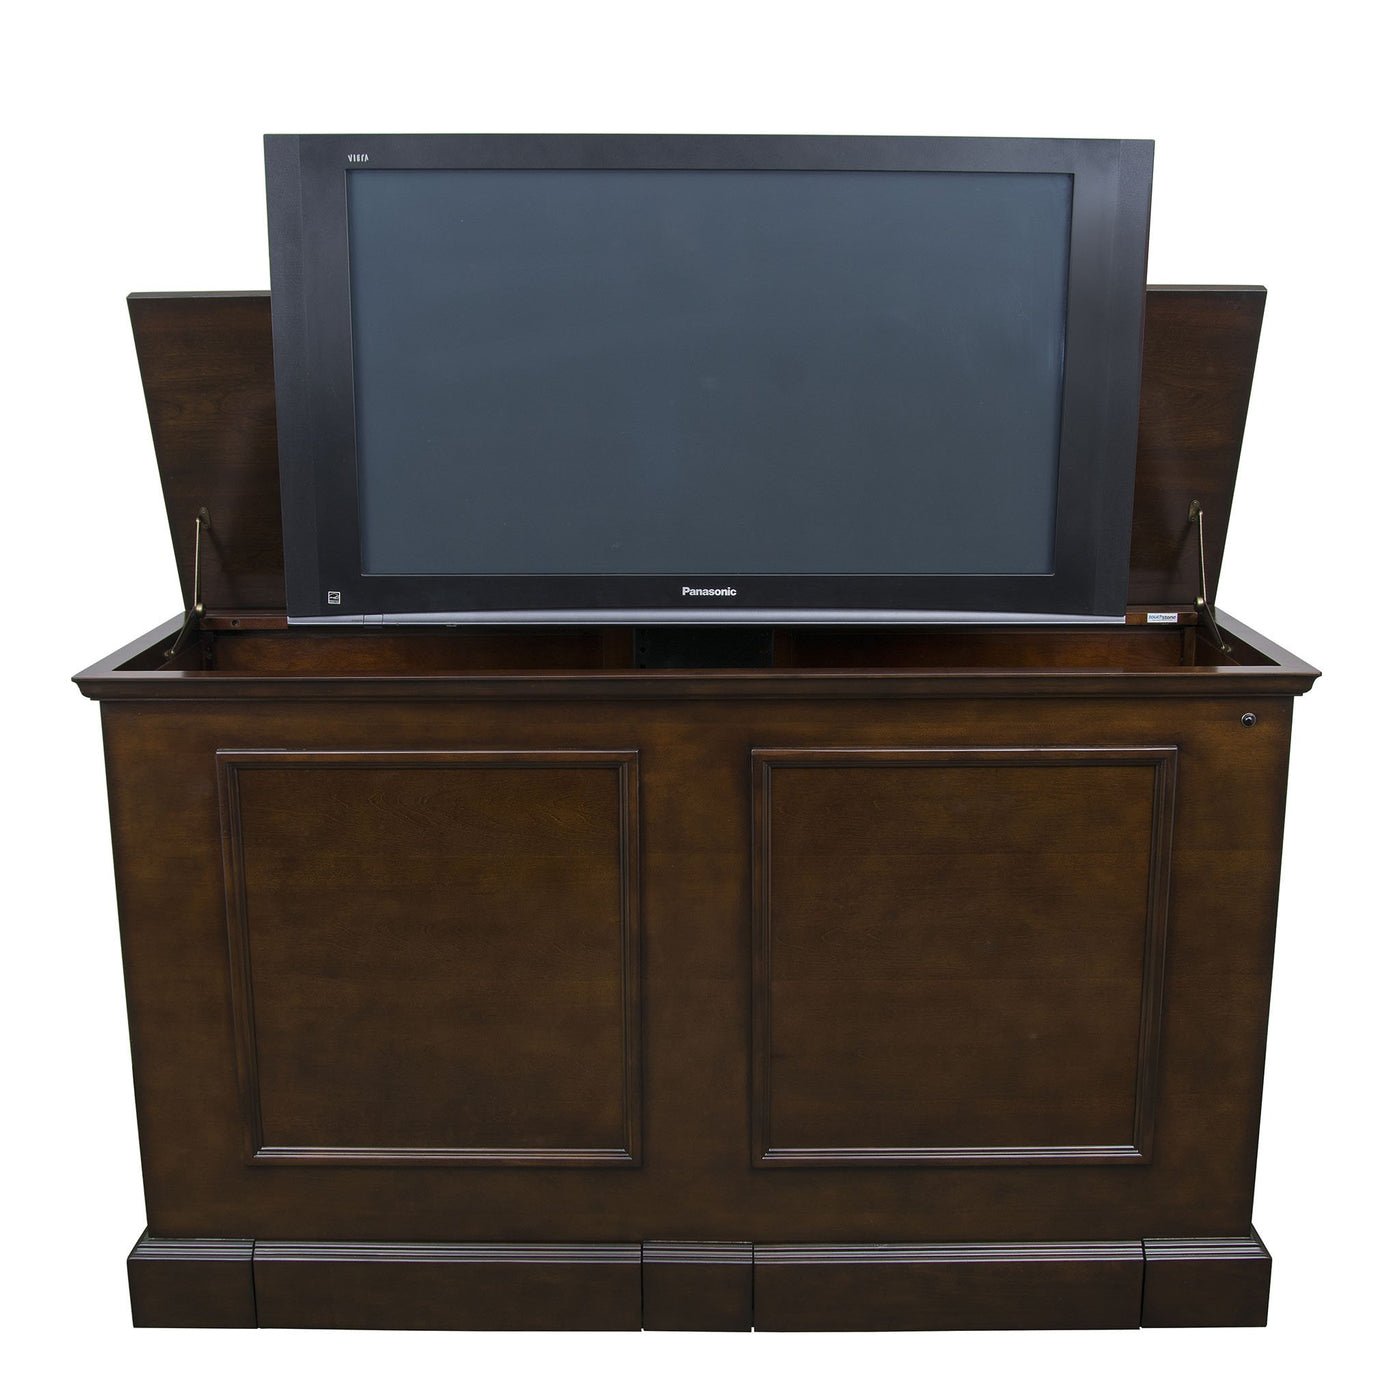 Touchstone Grand Elevate 74008 Espresso TV Lift Cabinet for 65" Flat screen TVs - TS-74008 - Avanquil